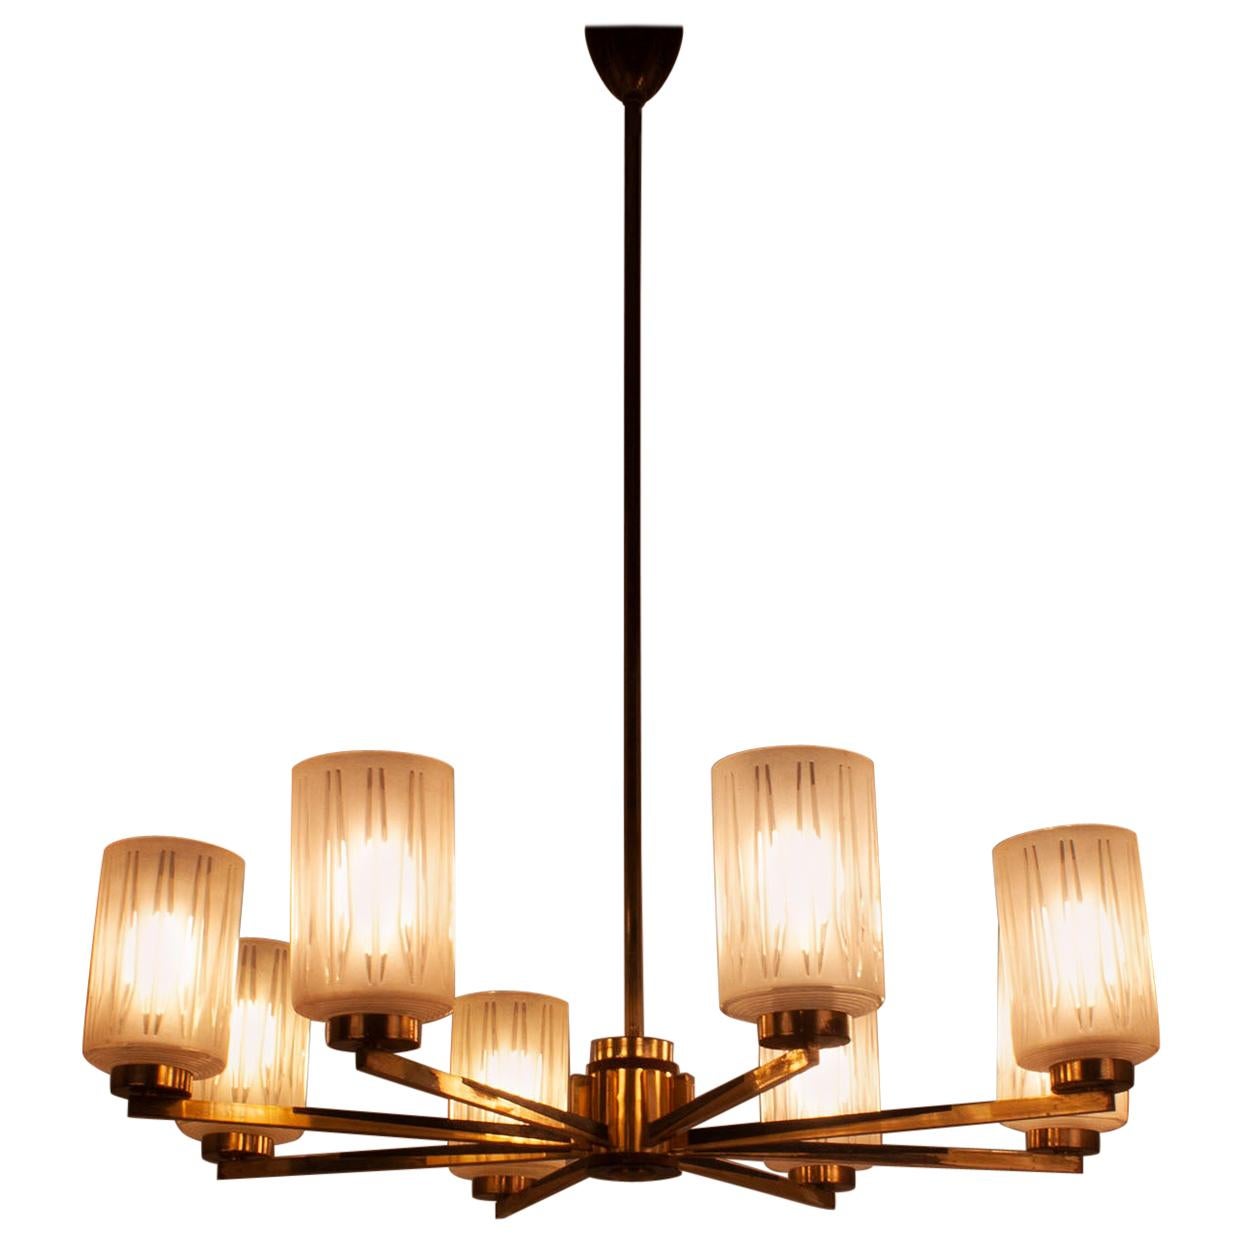 Chandelier with 8 Lights, Polished Brass, Glass Lampshades, Germany, 1950s For Sale